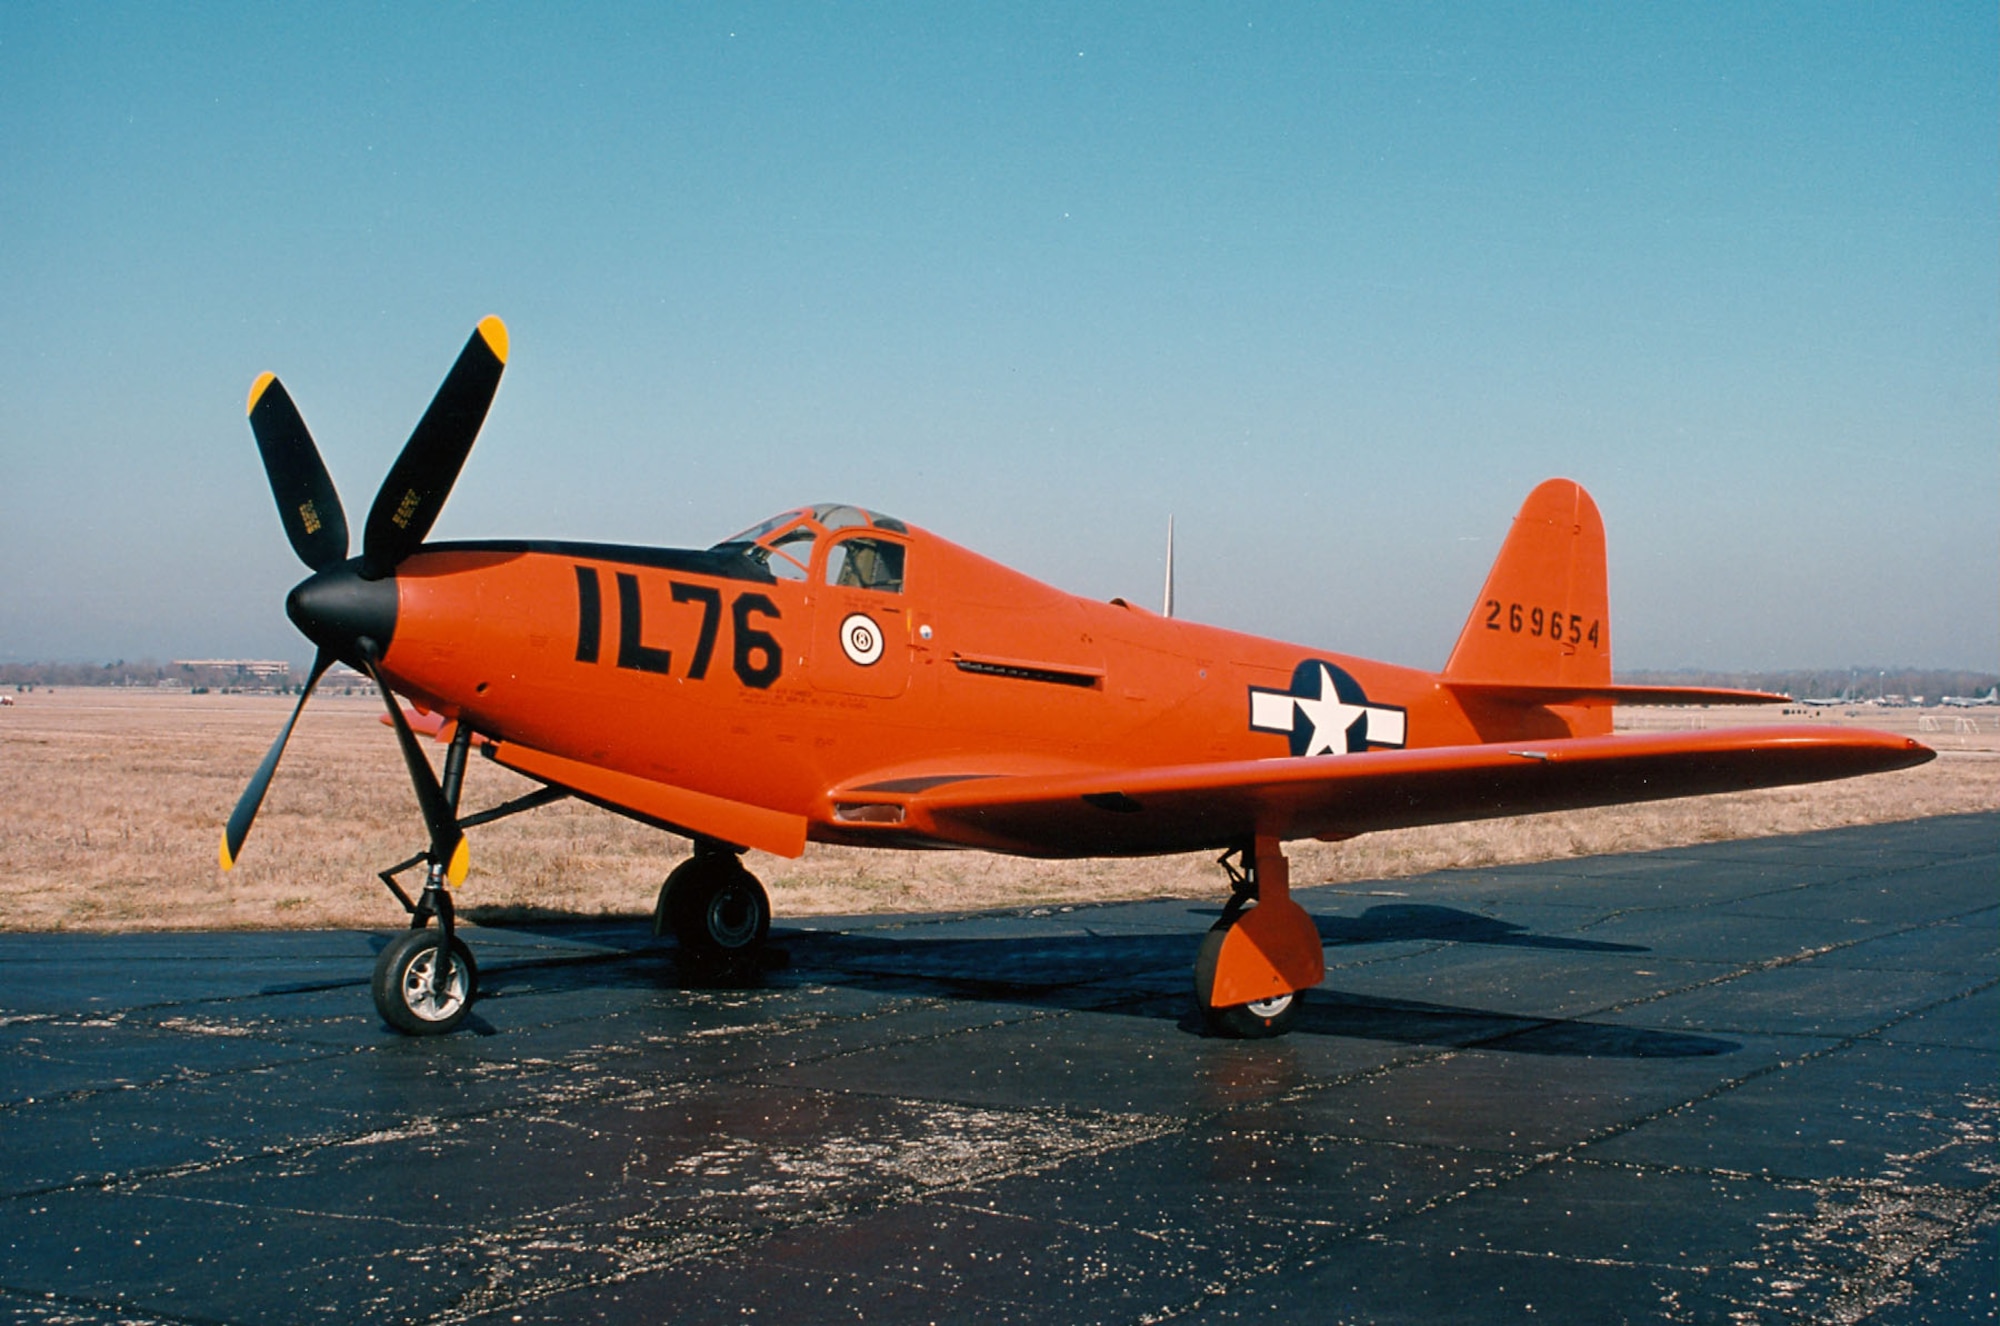 DAYTON, Ohio -- Bell P-63E Kingcobra at the National Museum of the United States Air Force. (U.S. Air Force photo)